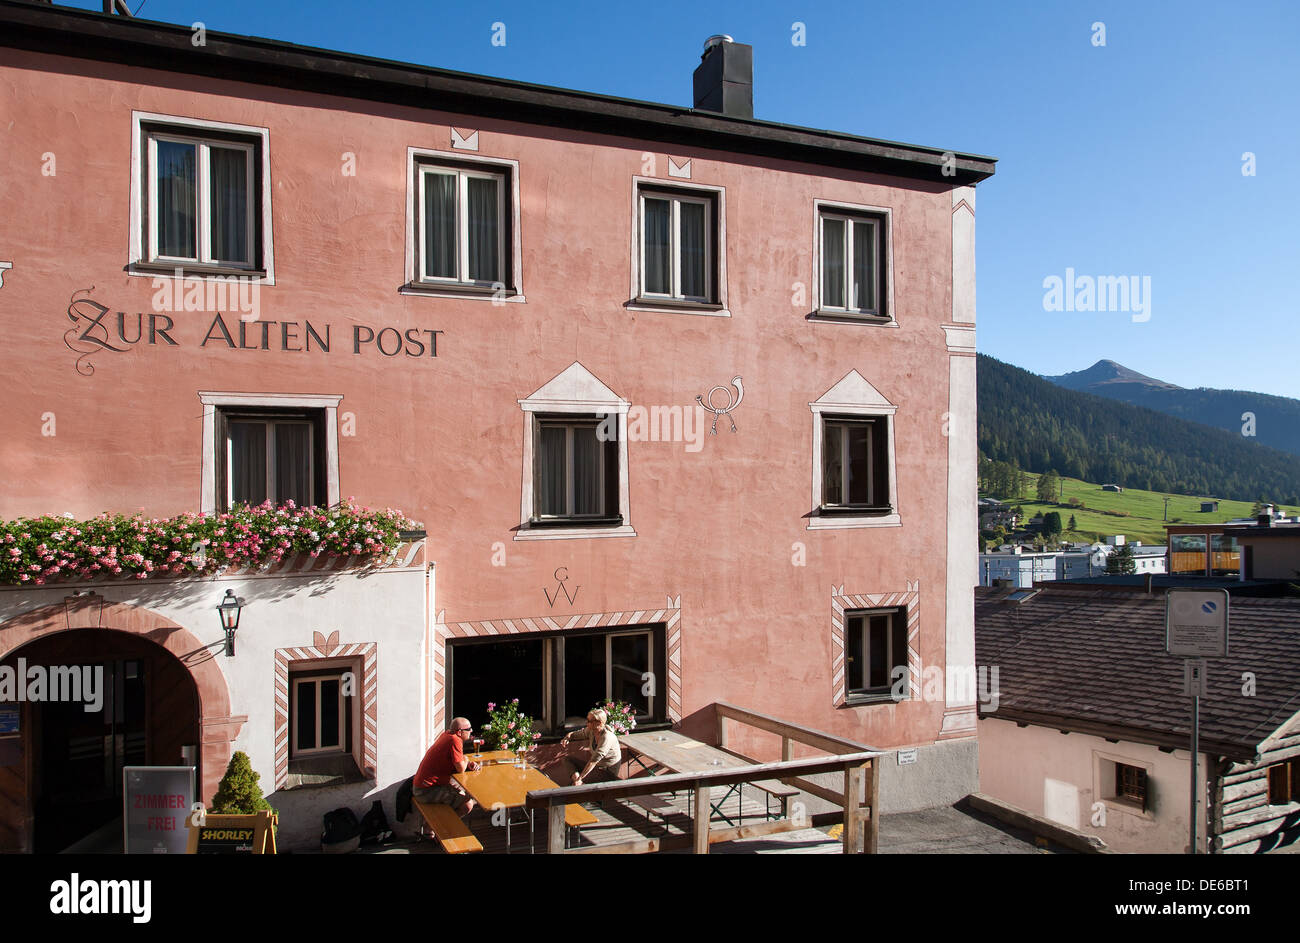 Hotel Zur High Resolution Stock Photography and Images - Alamy